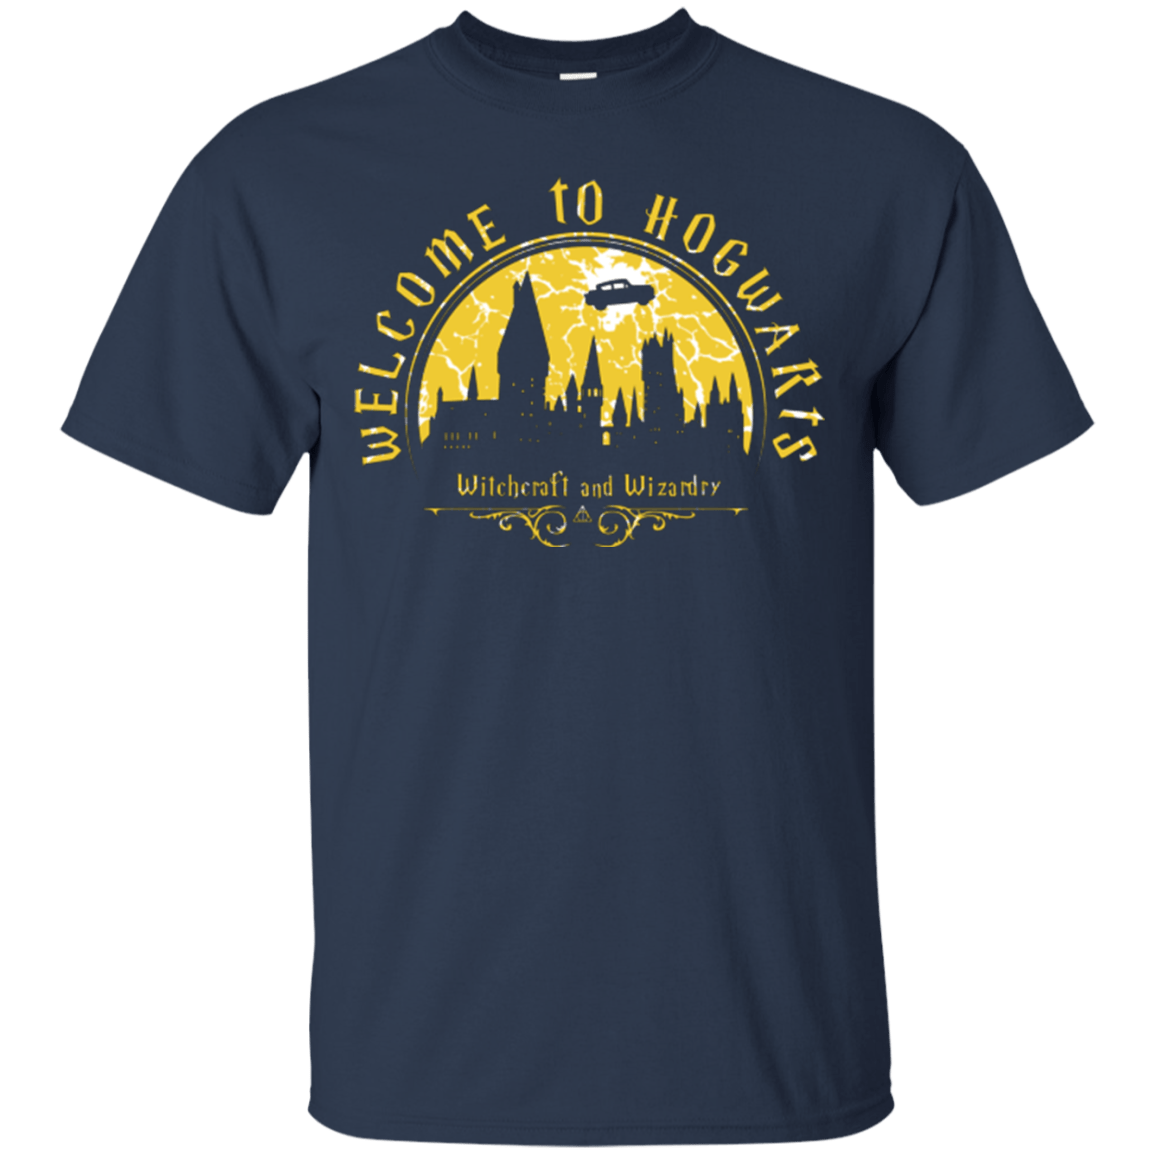 T-Shirts Navy / Small Welcome to Hogwarts T-Shirt